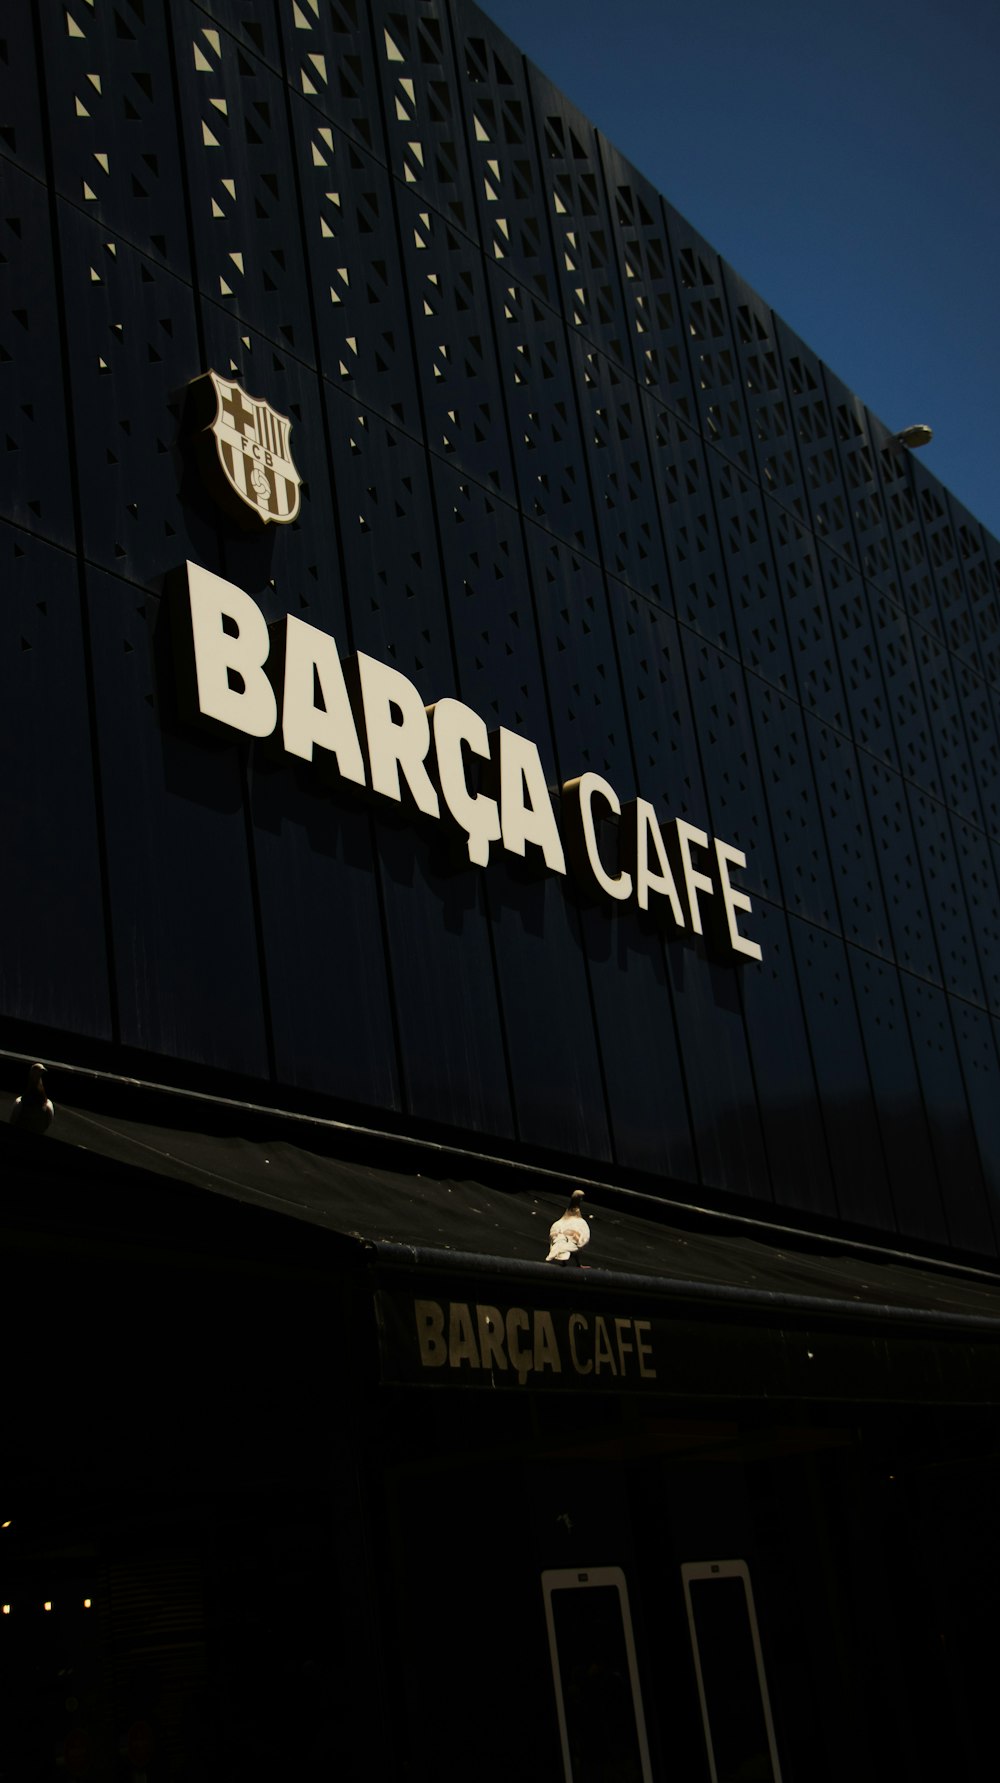 a barca cafe sign on the side of a building